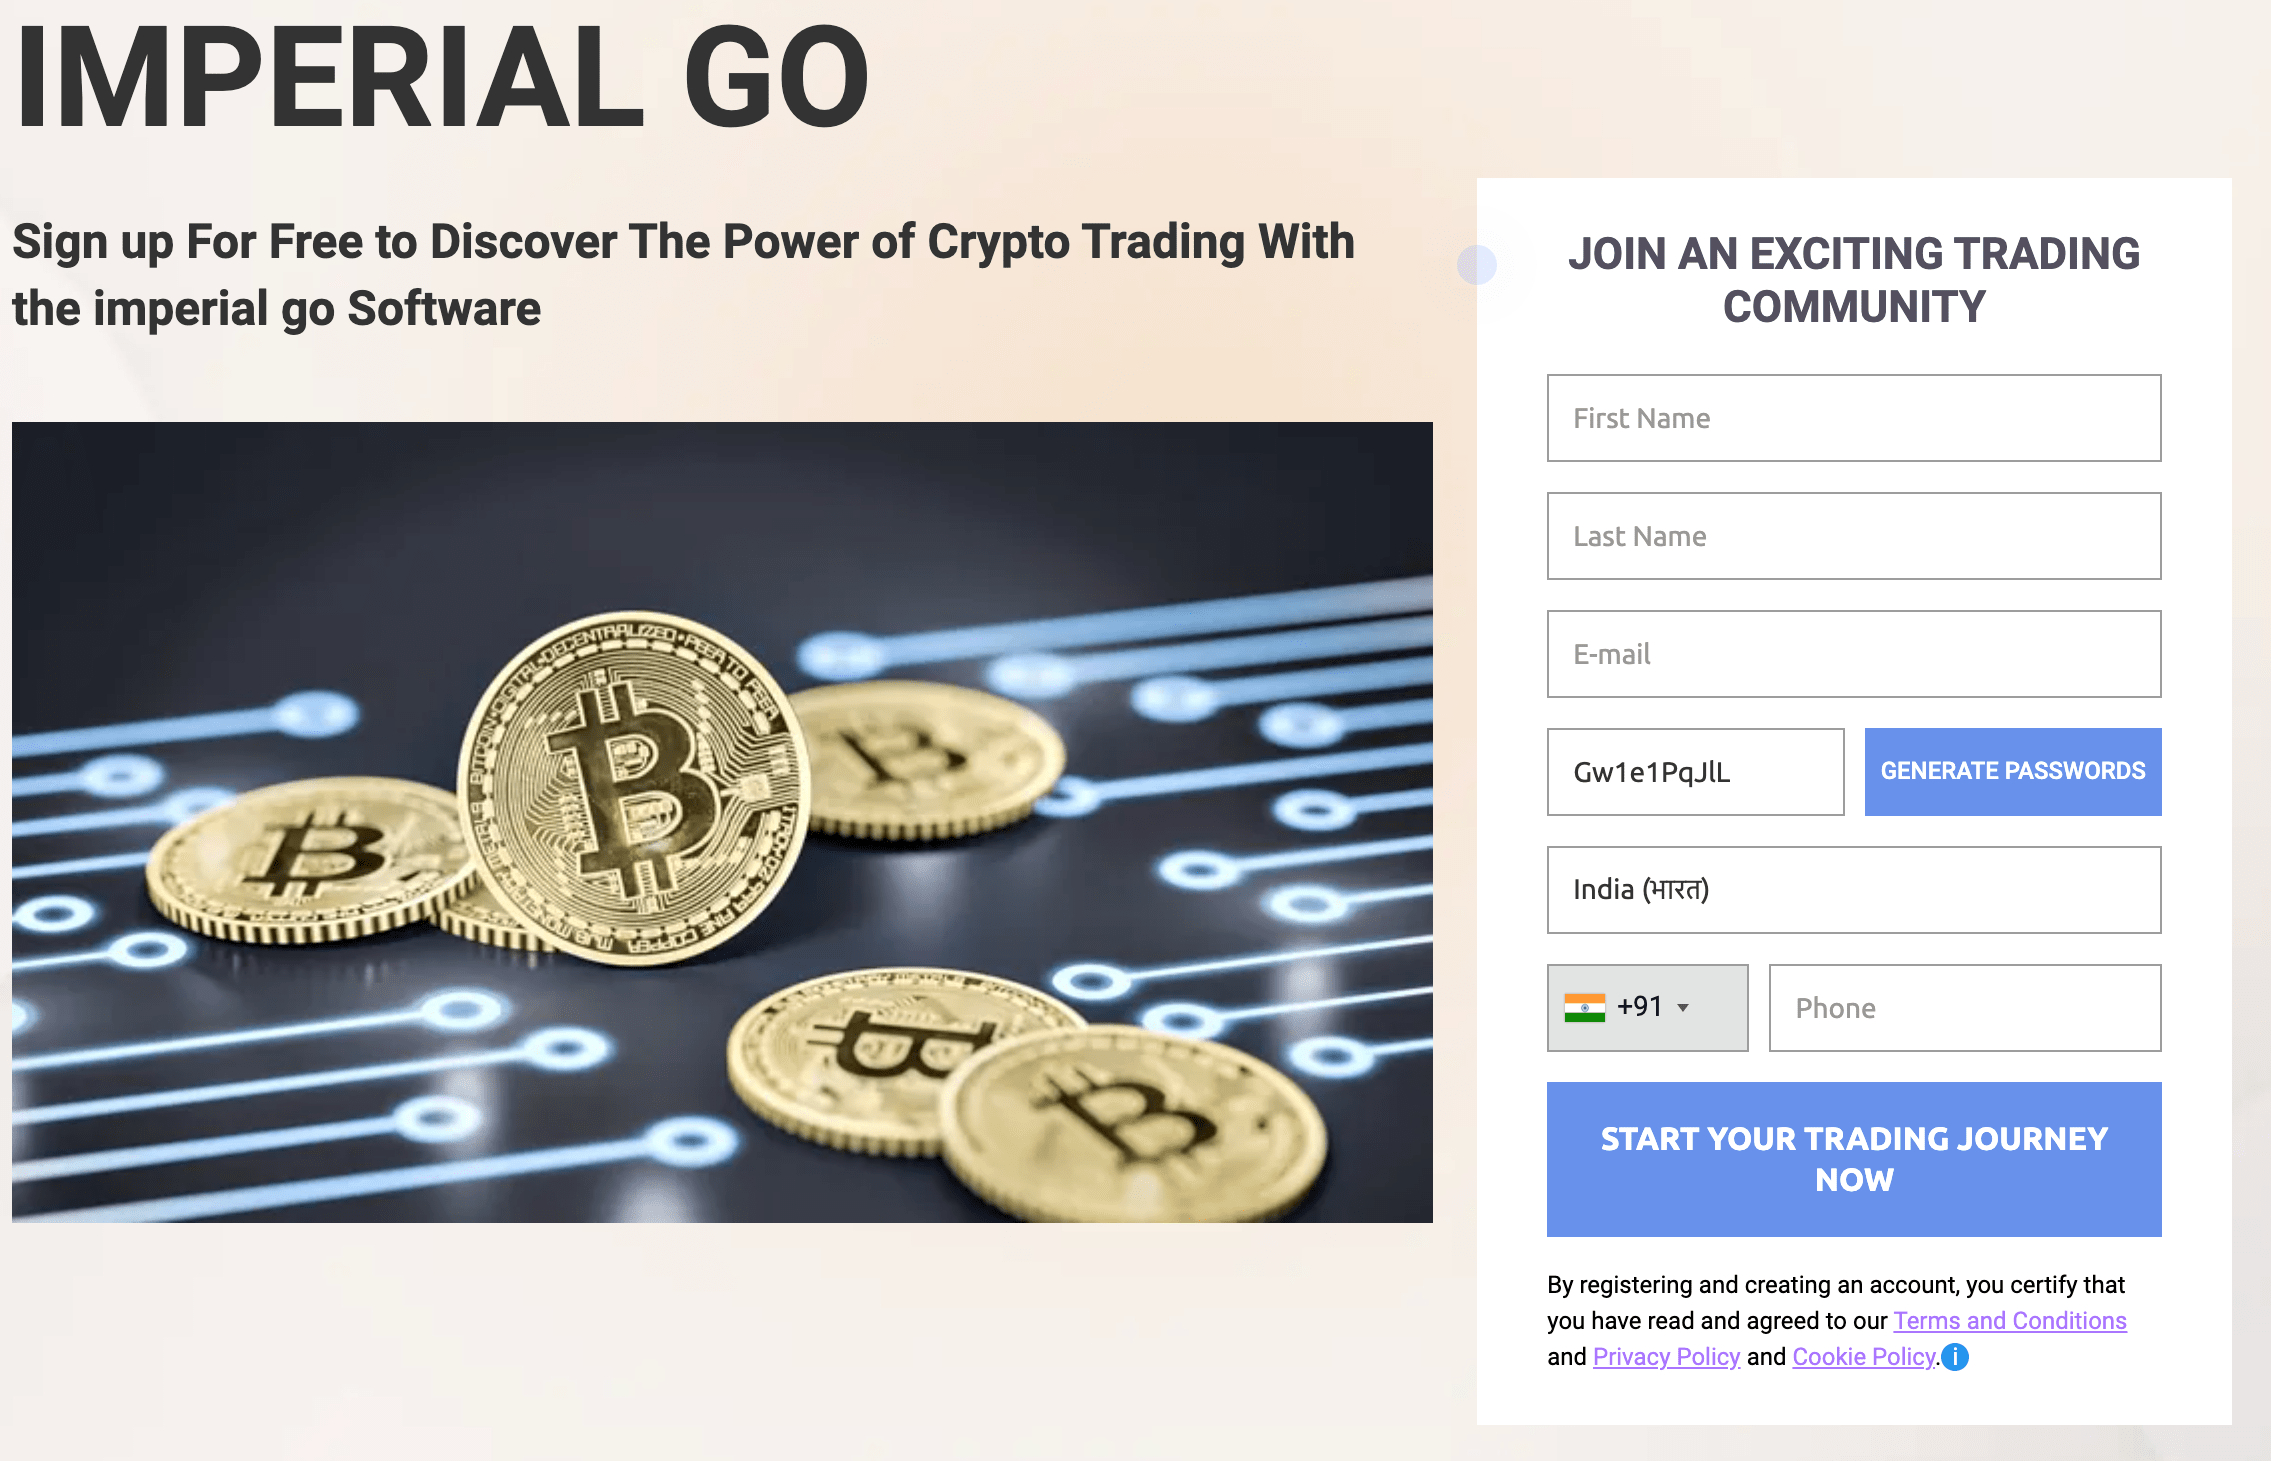 Imperial Go Review - Scam or Legitimate Trading Software